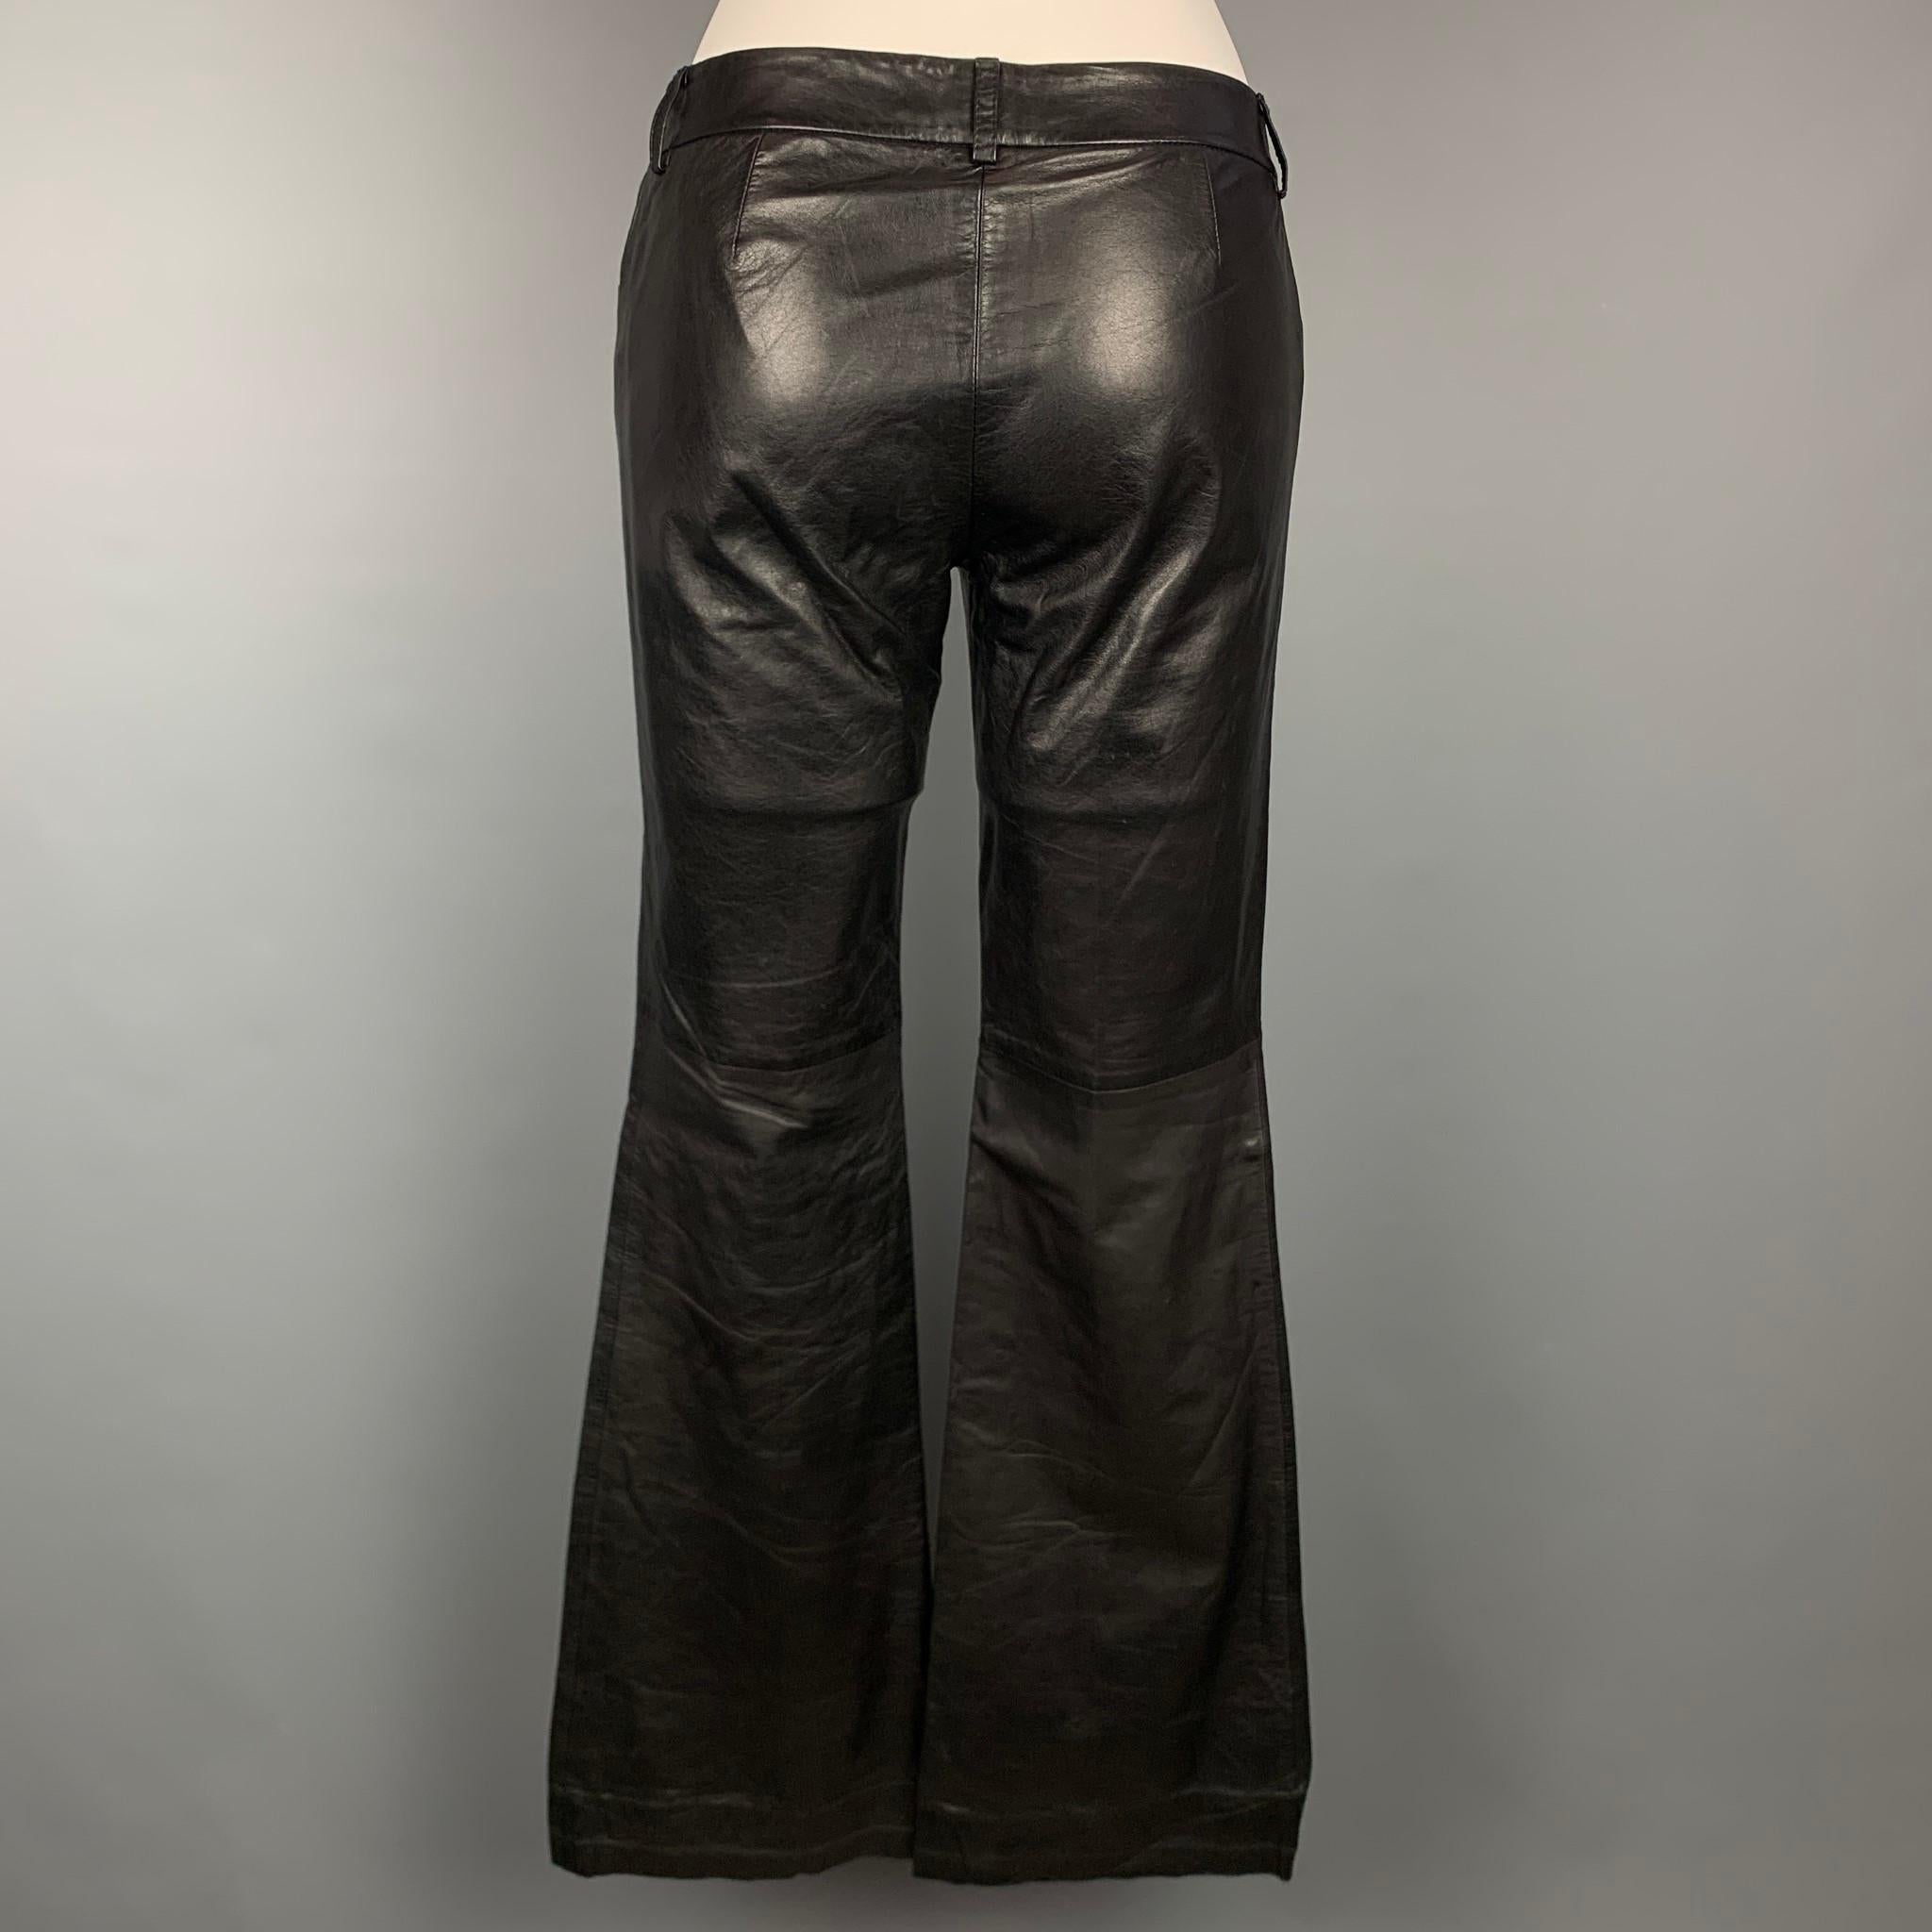 THEORY dress pants comes in a black leather featuring a boot cut style, front tab, and a zip fly closure. 

Very Good Pre-Owned Condition.
Marked: 2
Original Retail Price: $995.00

Measurements:

Waist: 29 in.
Rise: 7.5 in.
Inseam: 34 in. 